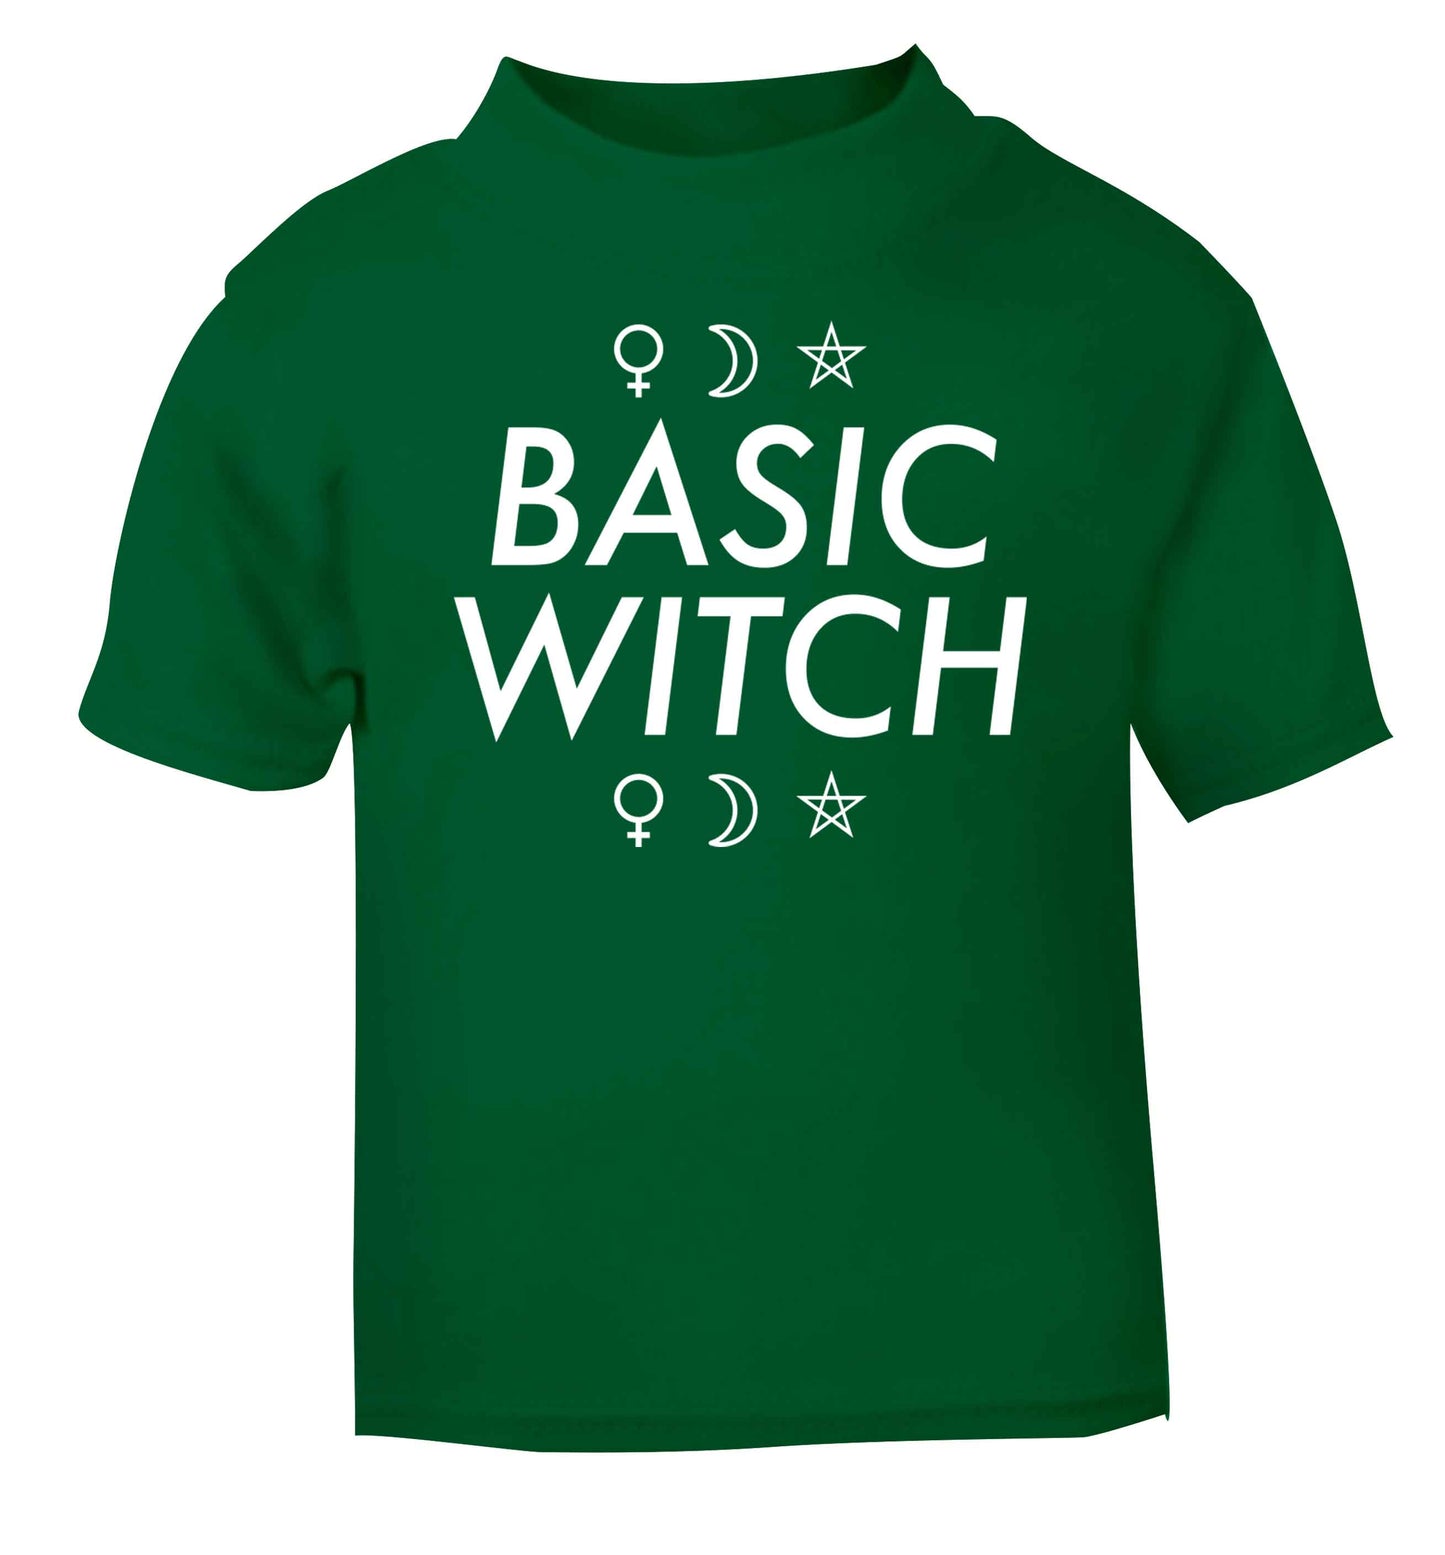 Basic witch 1 green baby toddler Tshirt 2 Years